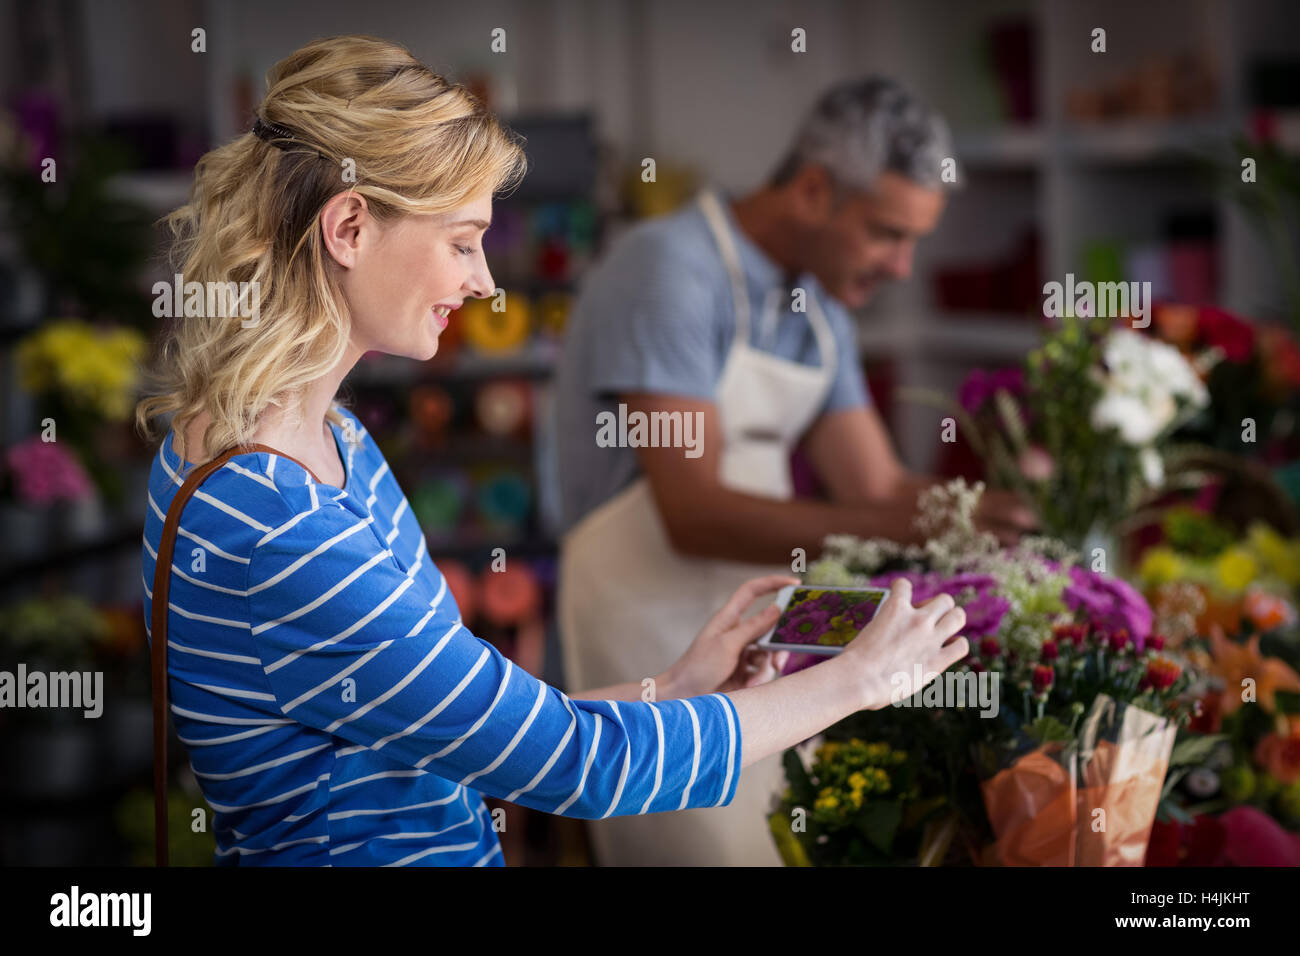 Woman taking photograph of flower bouquet Stock Photo